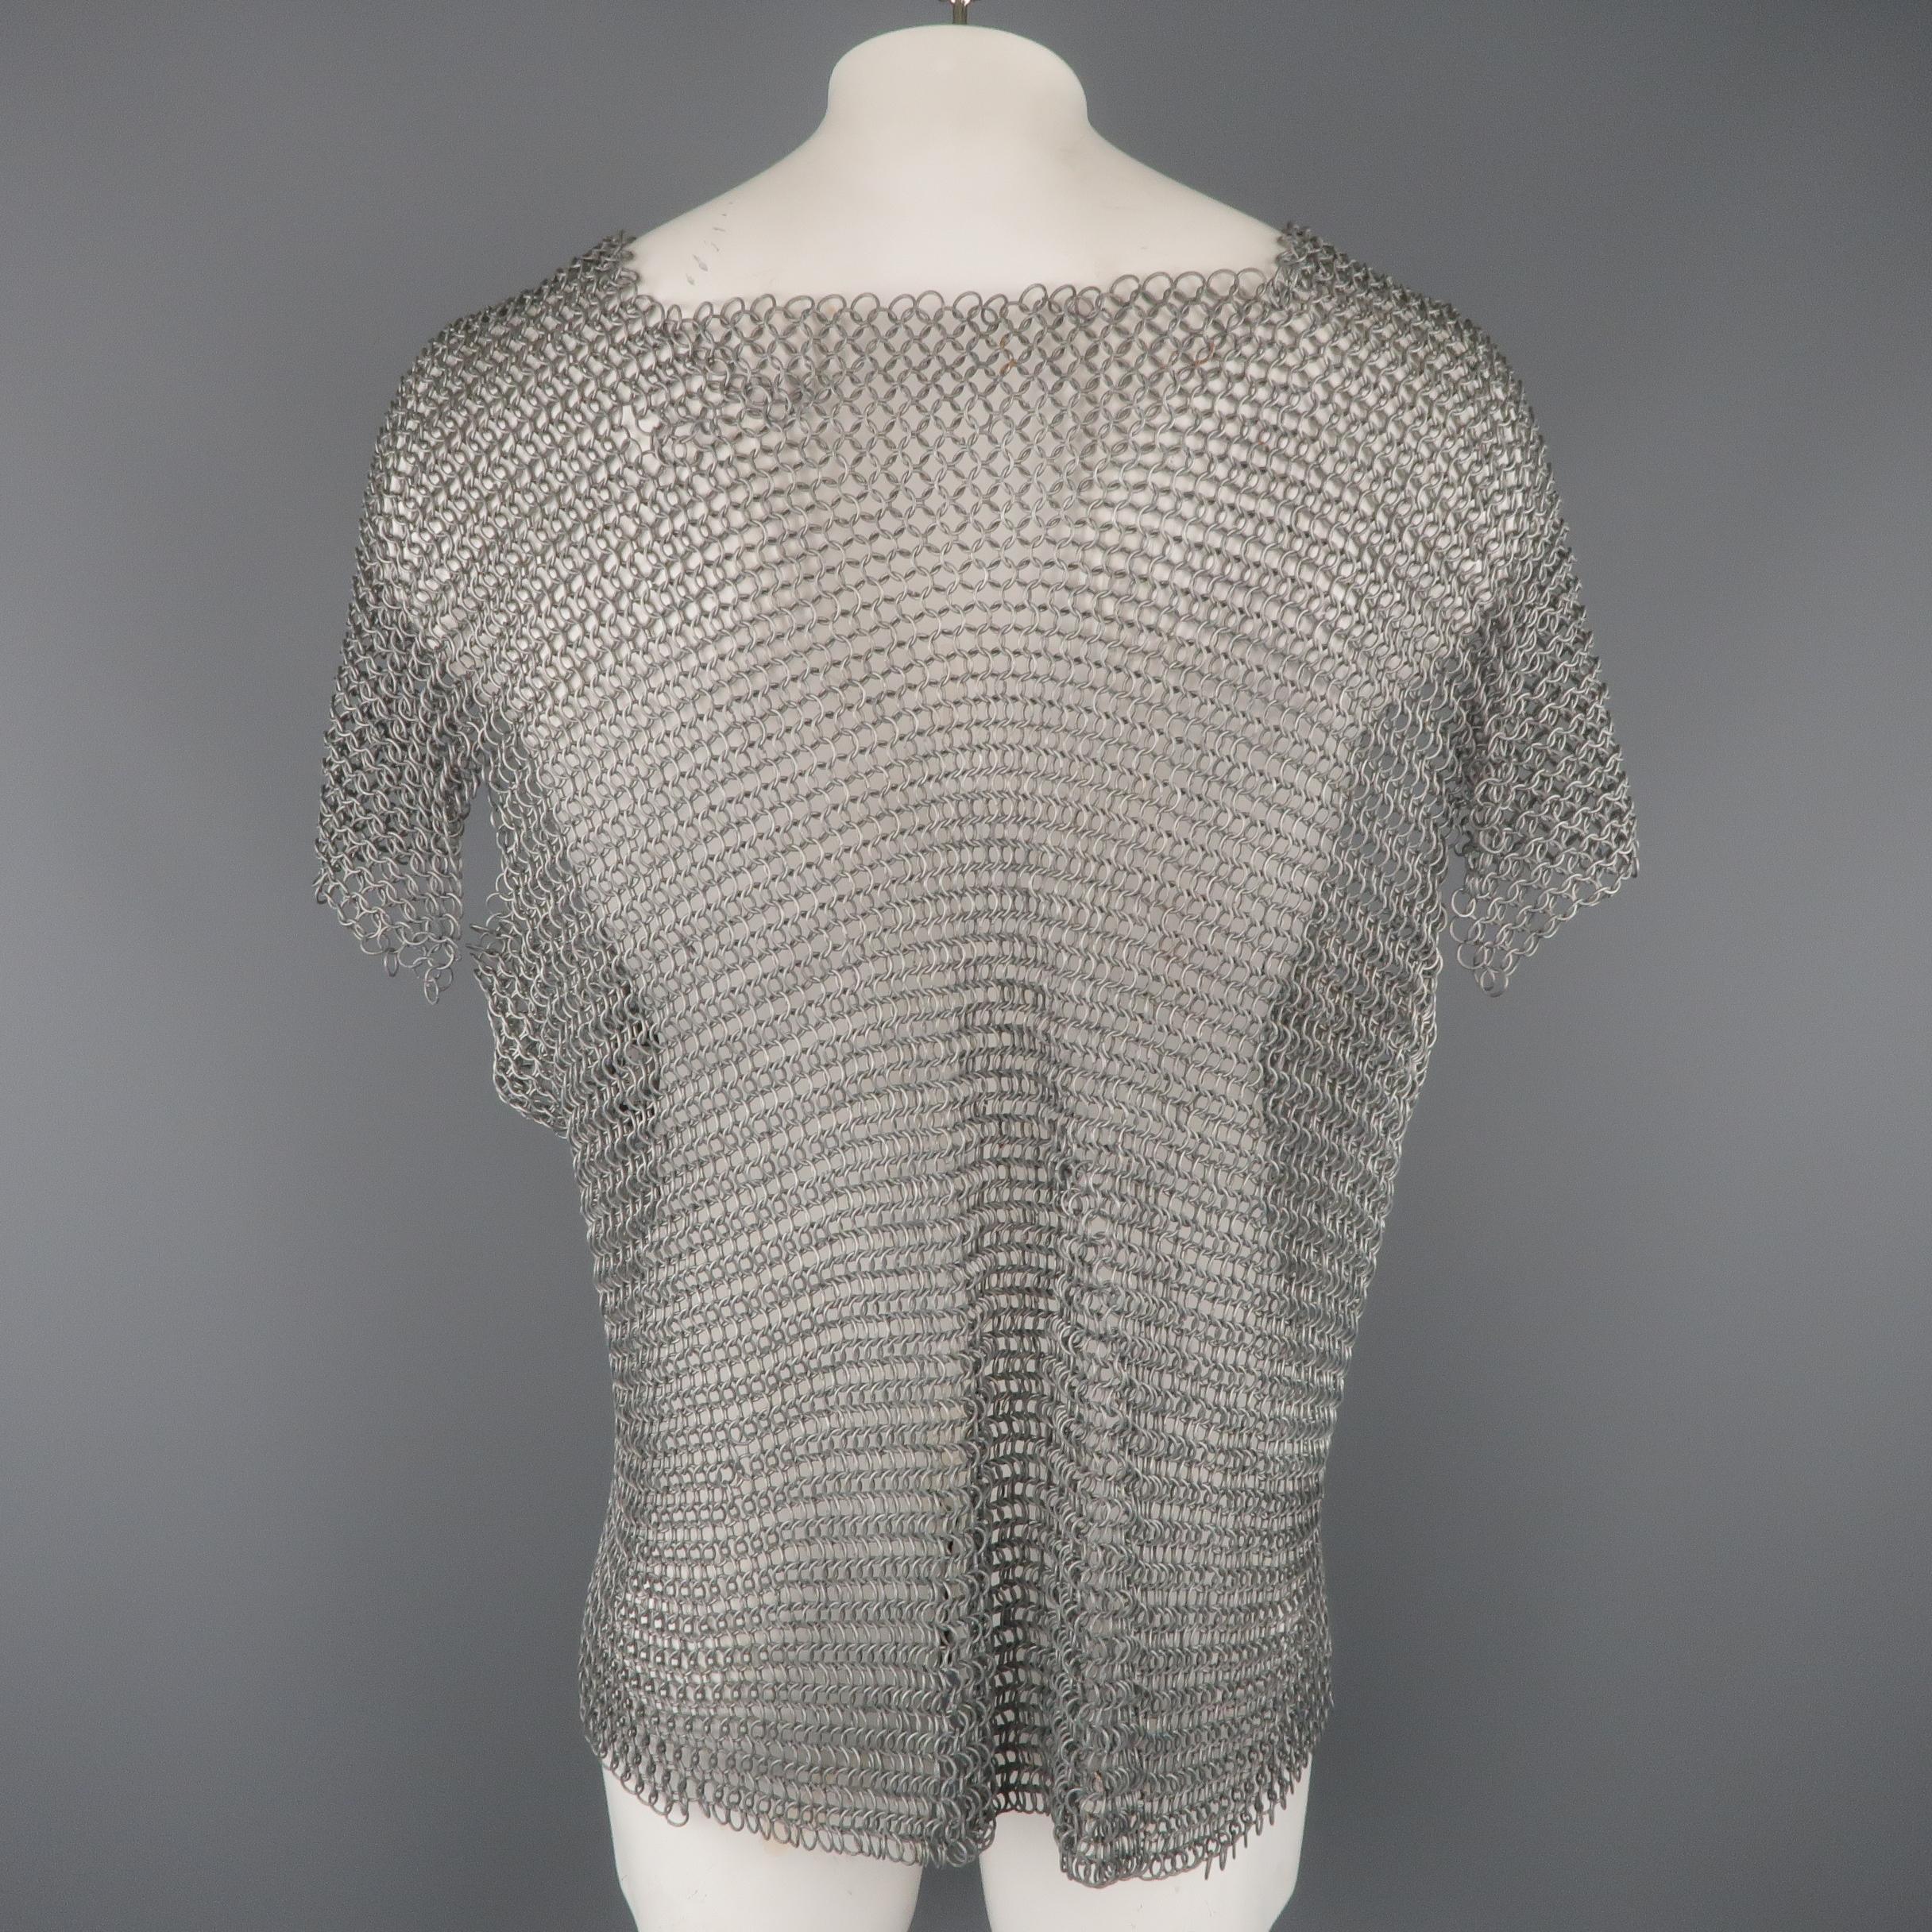 Women's or Men's Vintage Silver Tone Metal Link Medieval Chainmail Armor Shirt